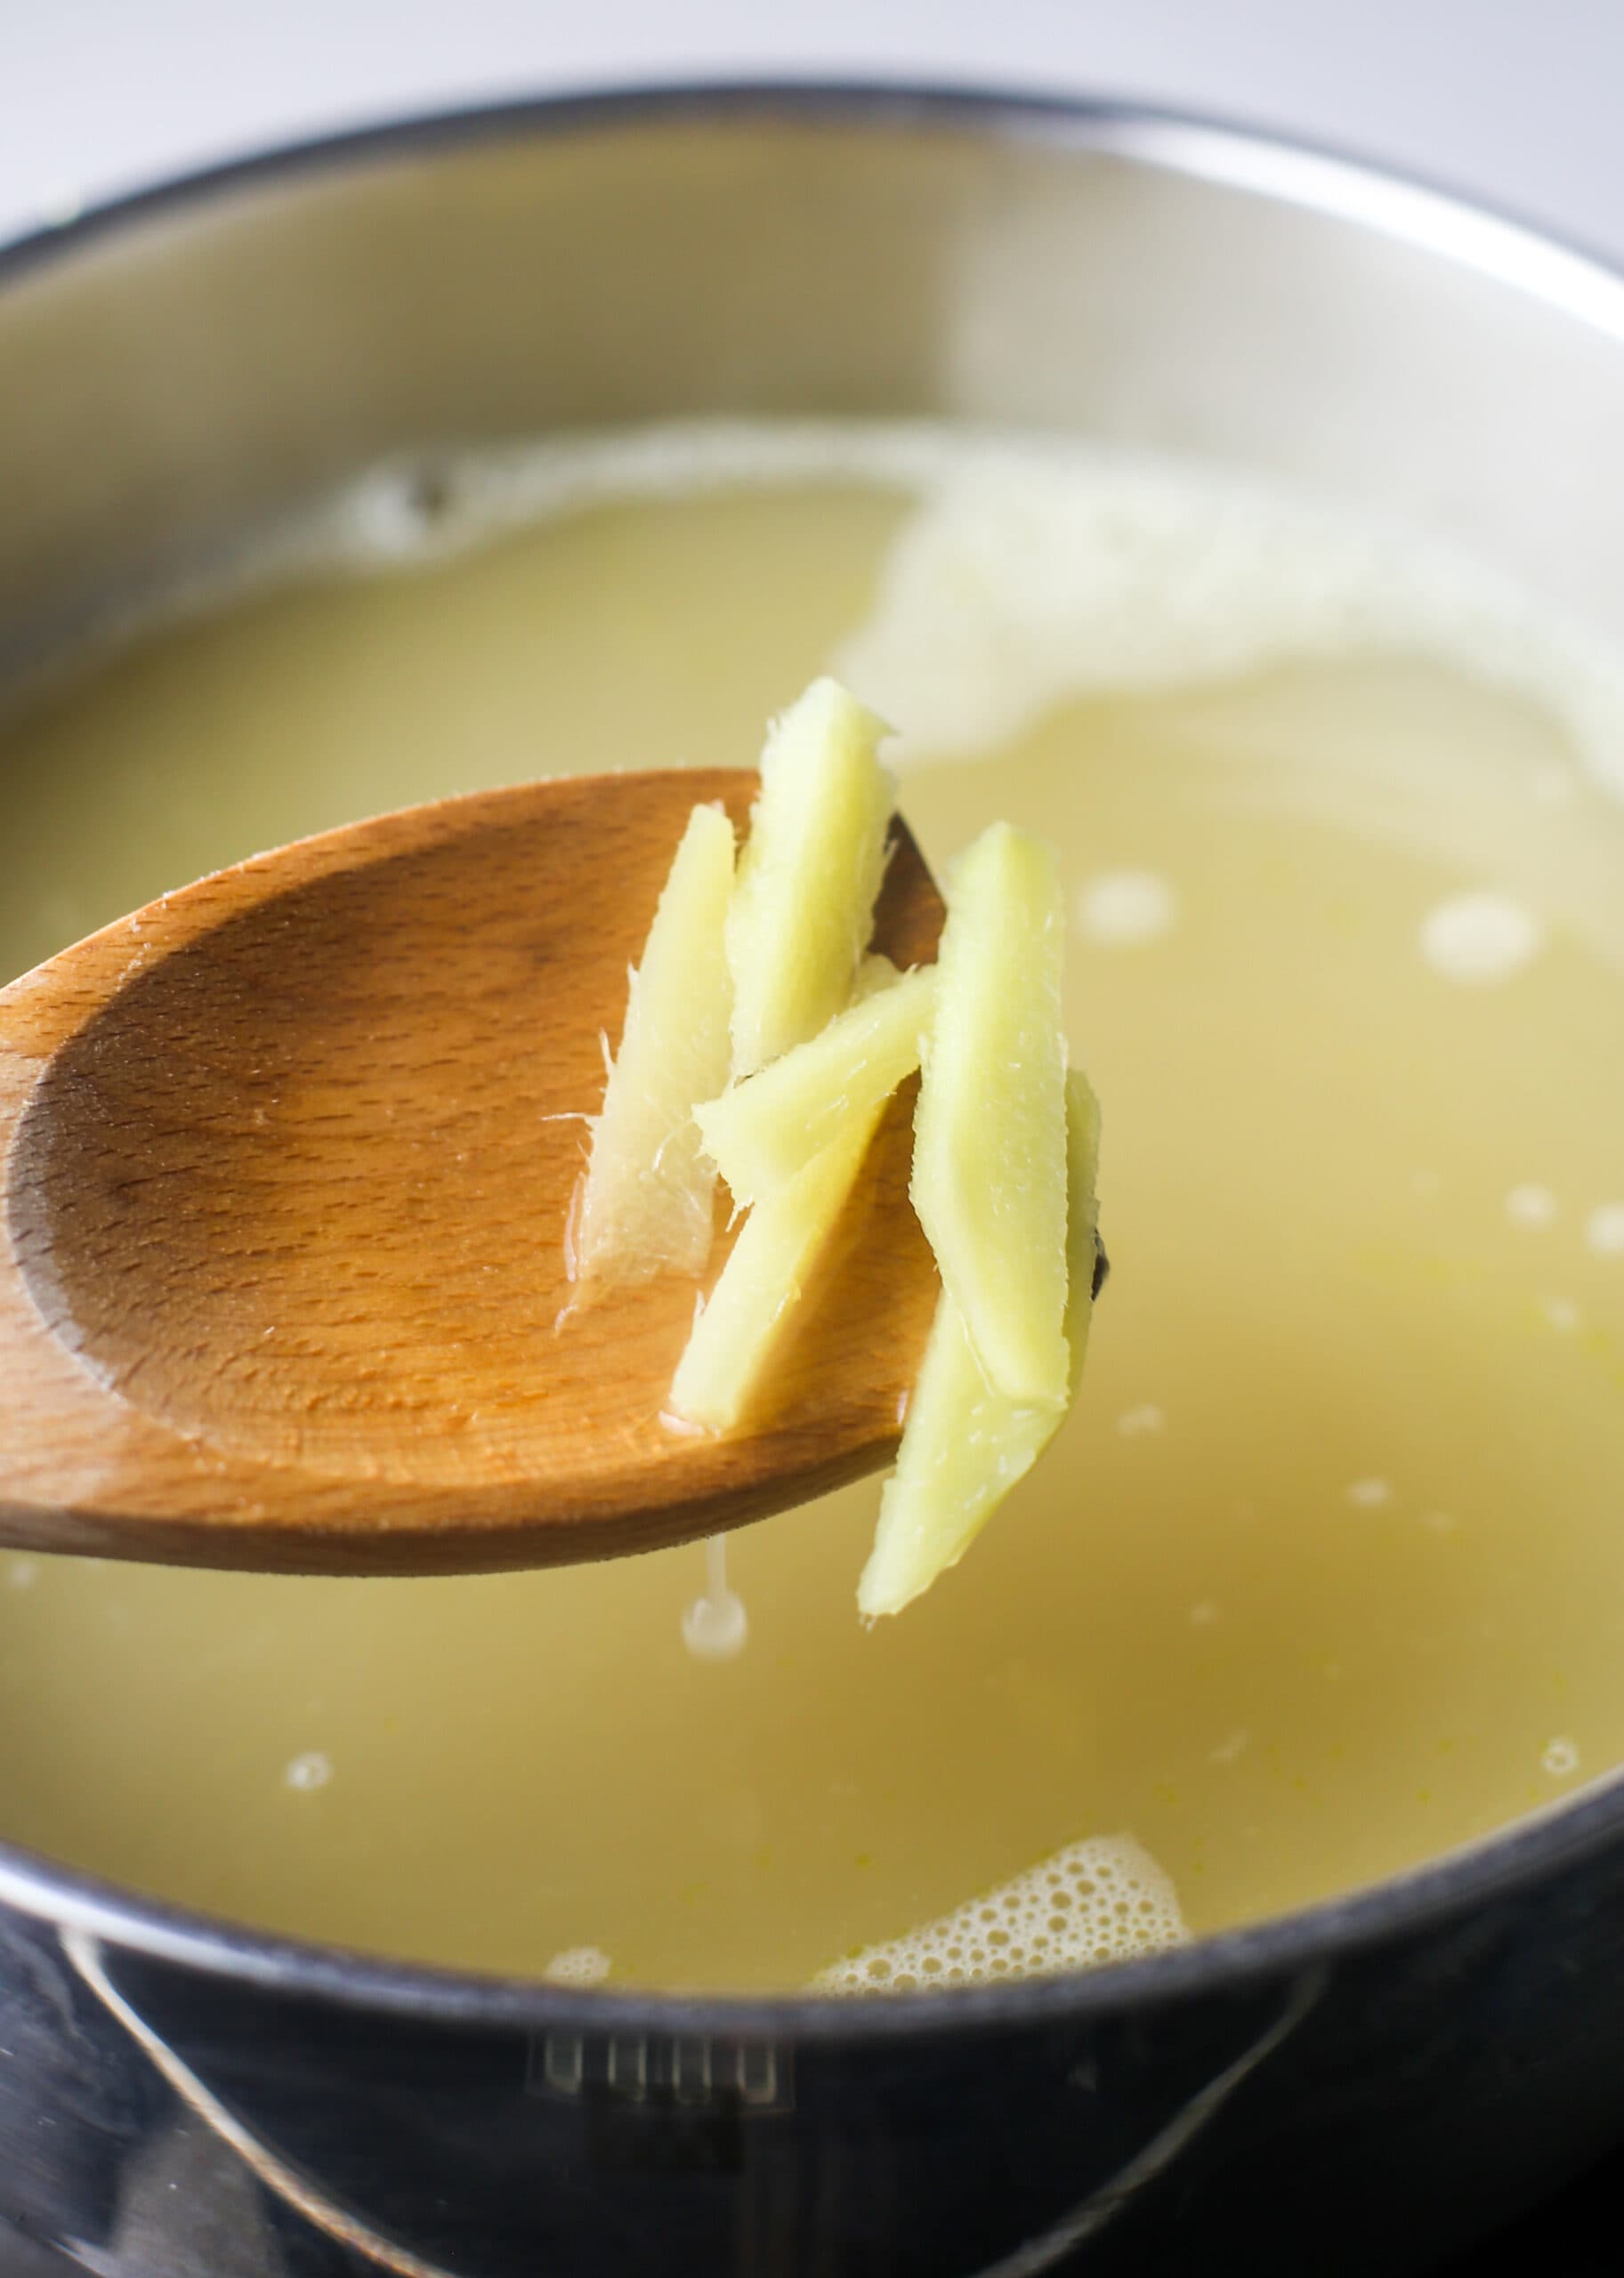 A wooden spoon holding ginger slices over a pot of ginger-flavoured chicken broth.